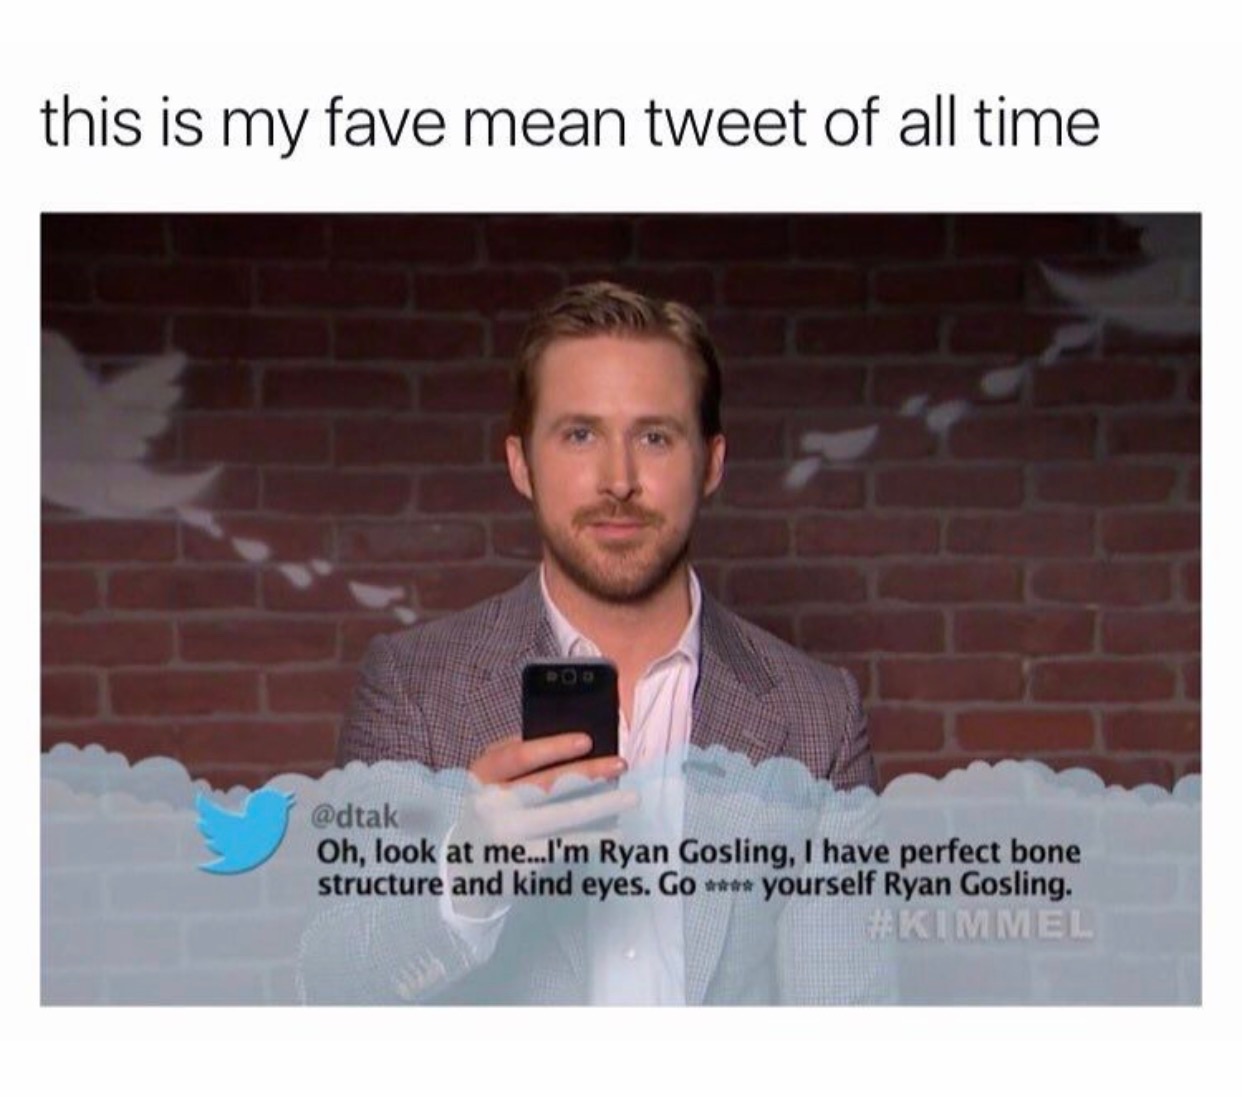 ryan gosling mean tweets - this is my fave mean tweet of all time Oh, look at me...I'm Ryan Gosling, I have perfect bone structure and kind eyes. Go yourself Ryan Gosling.